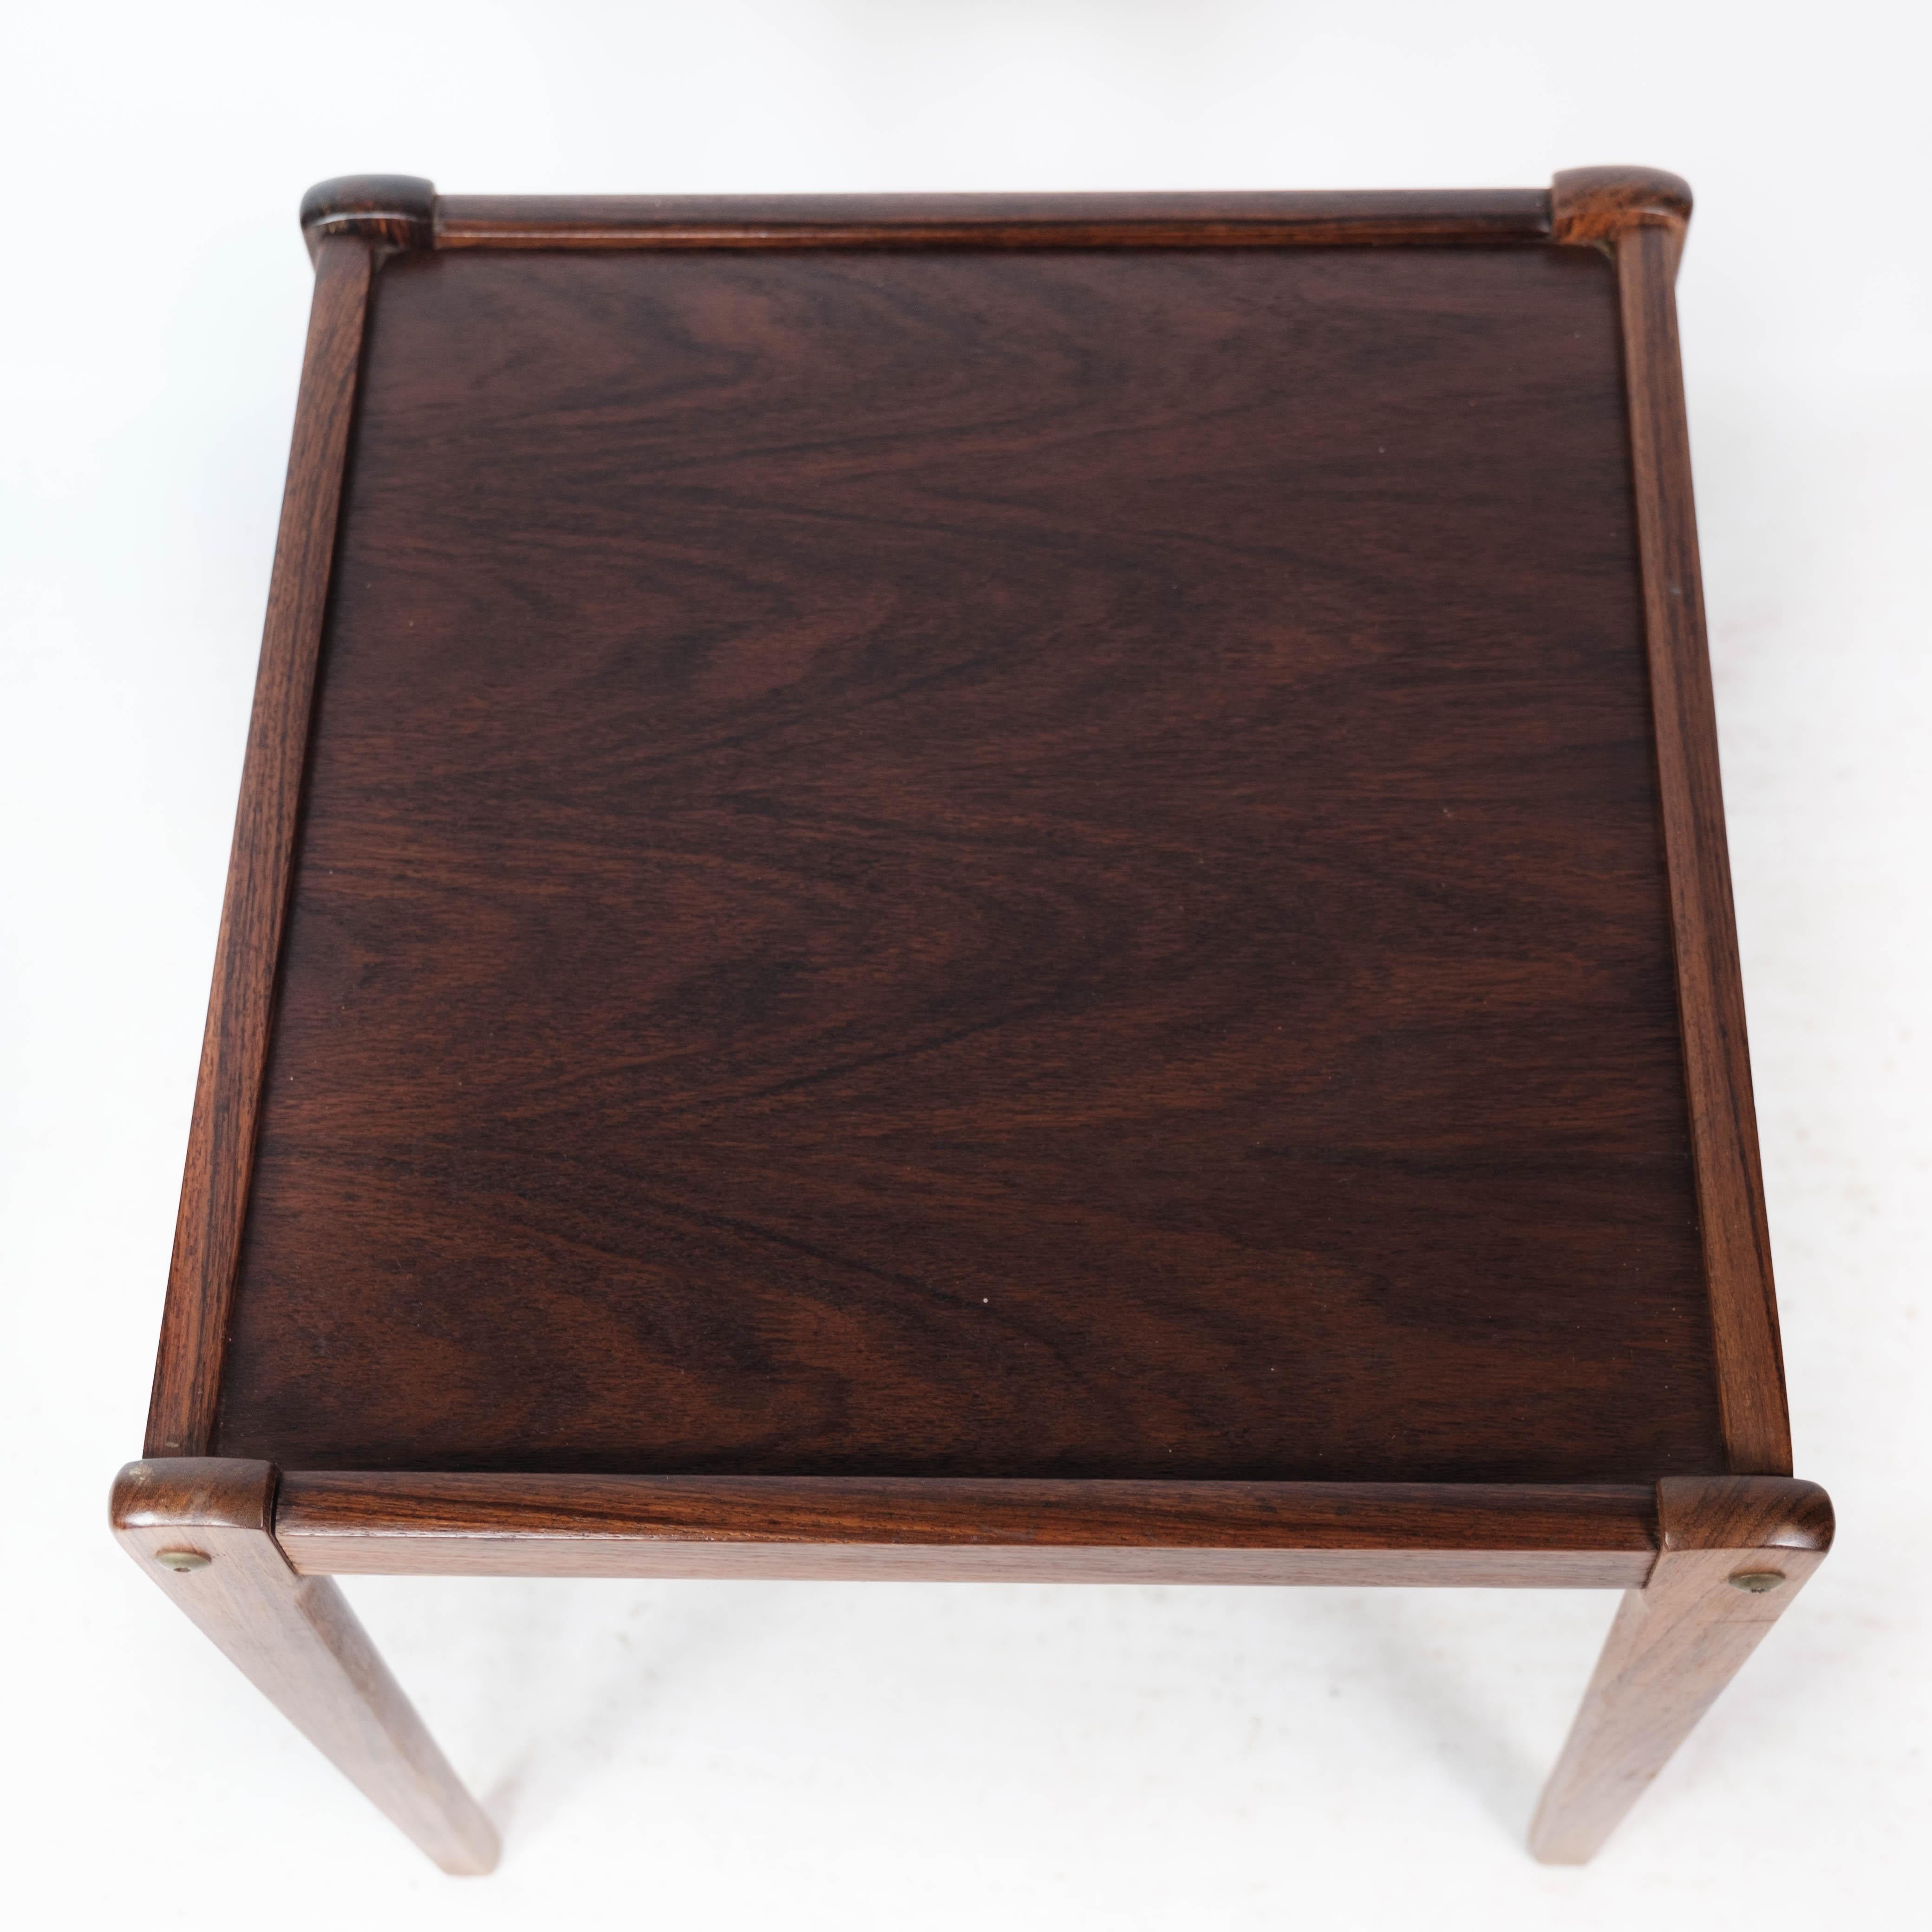 Side table in rosewood of Danish design from the 1960s. The table is in great vintage condition.